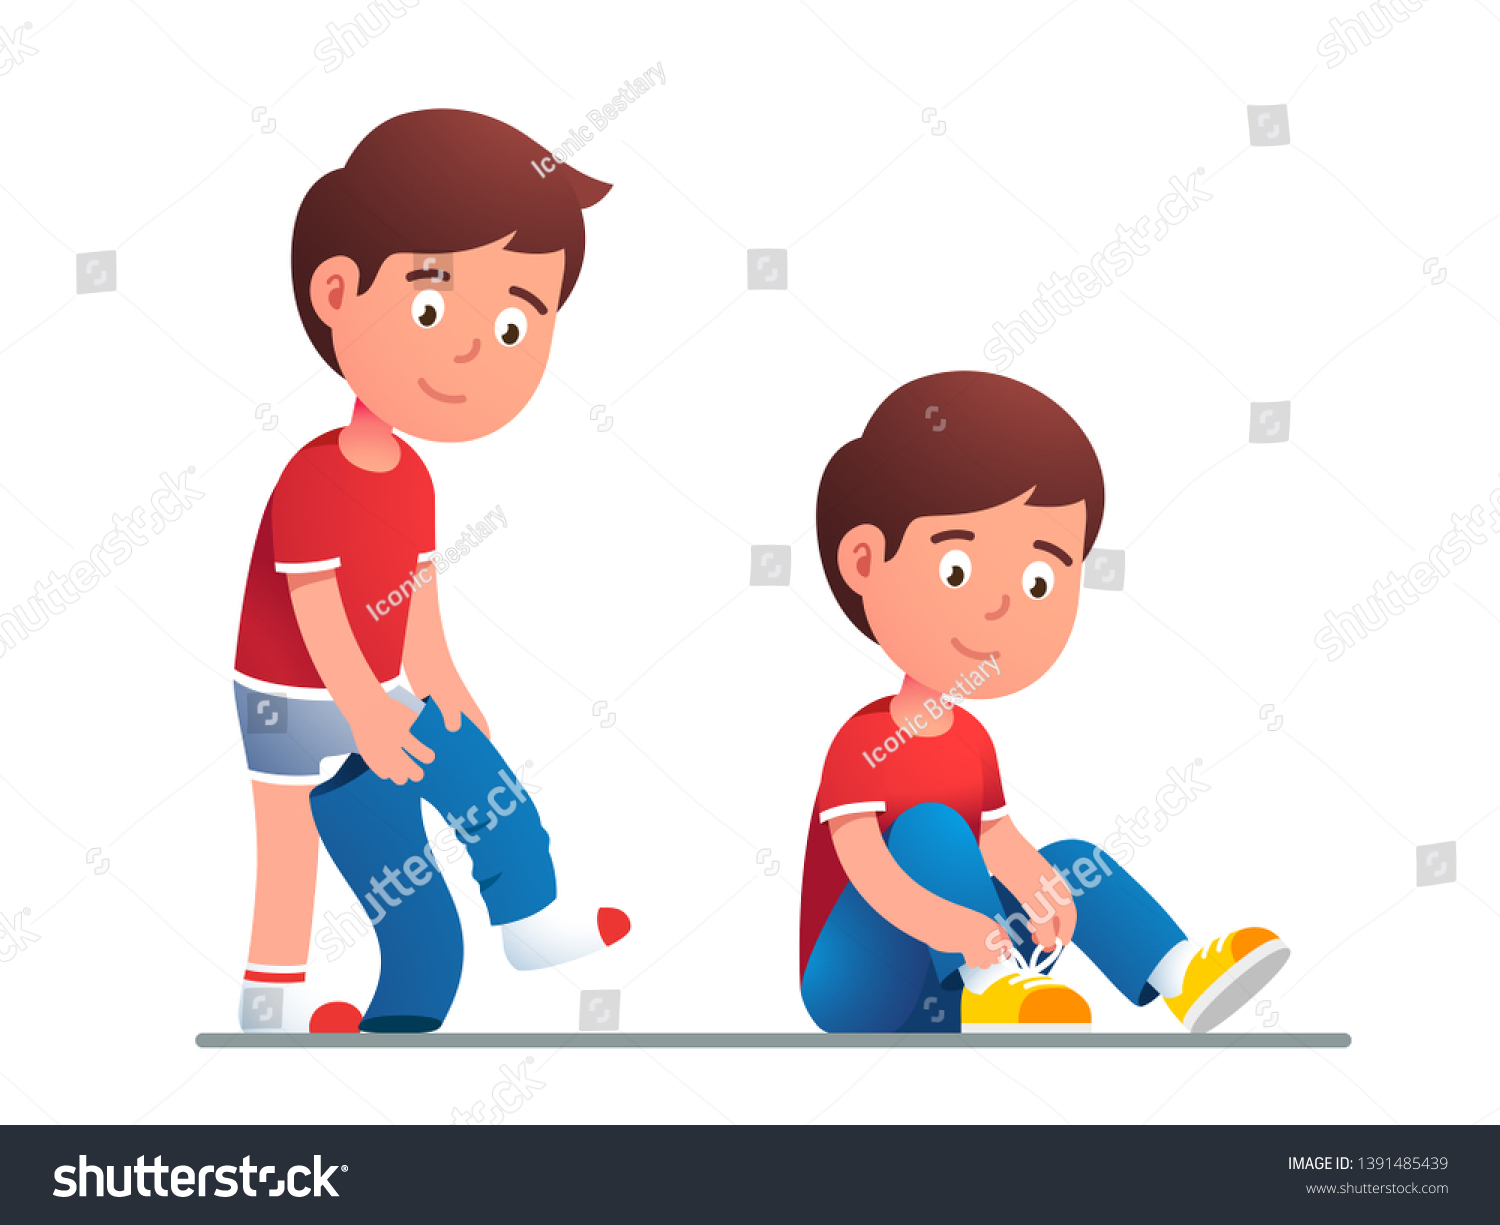 Boy Kid Dressing Changing Pants Child Stock Vector (Royalty Free ...